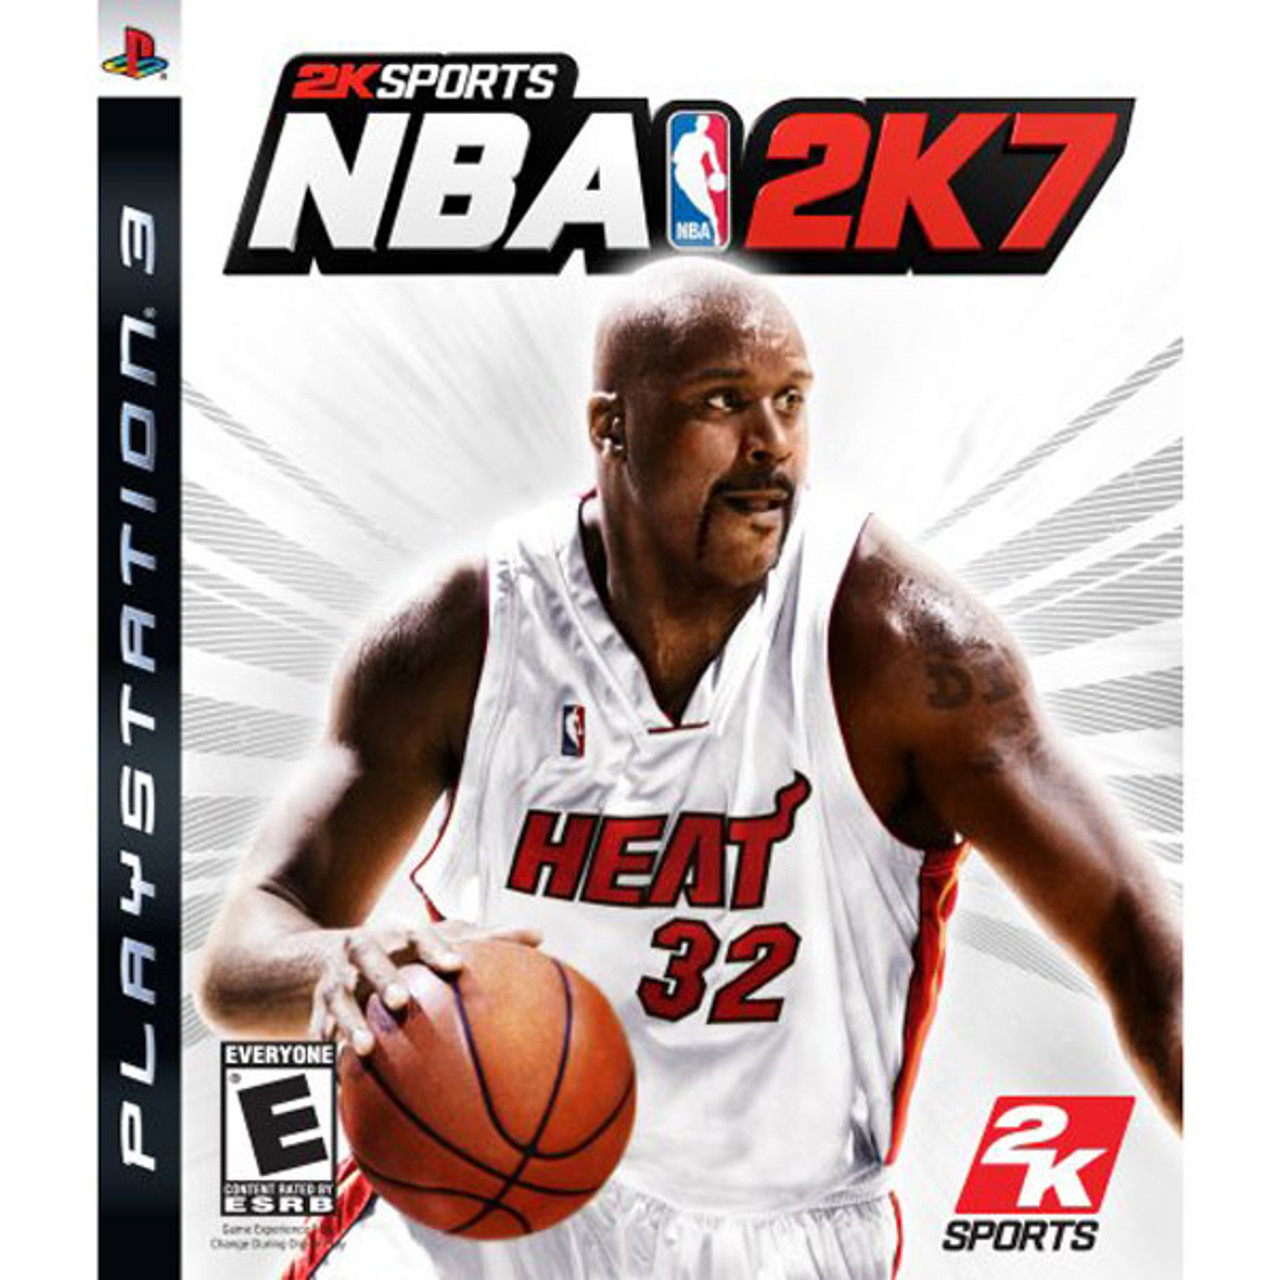 NBA 2K7 Playstation 3 PS3 Game For Sale DKOldies